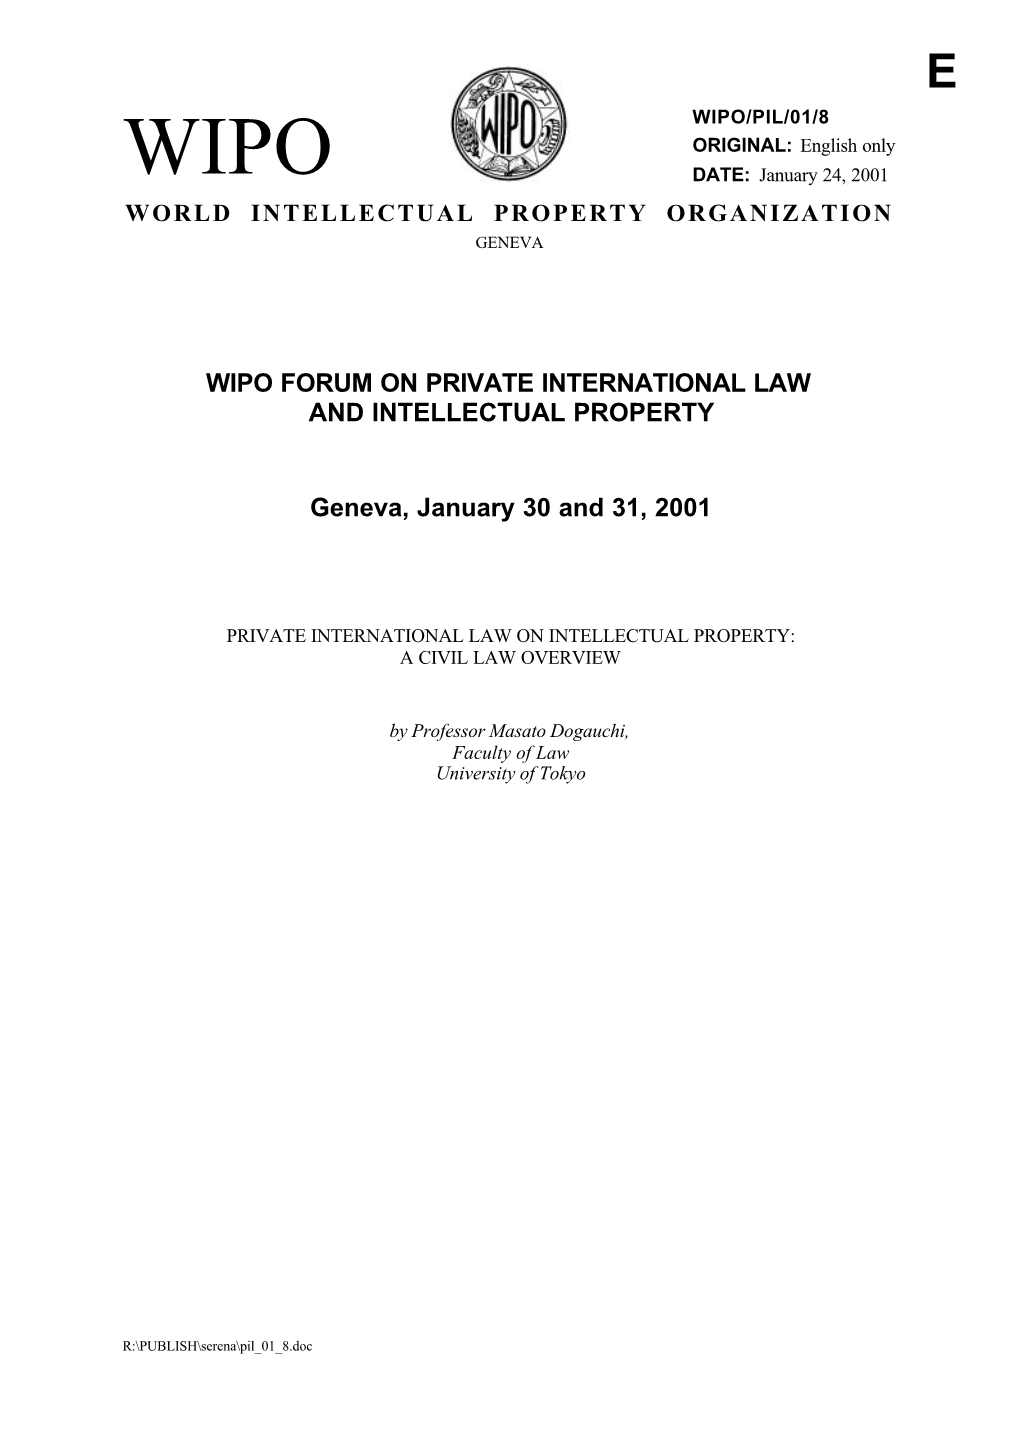 Private International Law on Intellectual Property: a Civil Law Overview